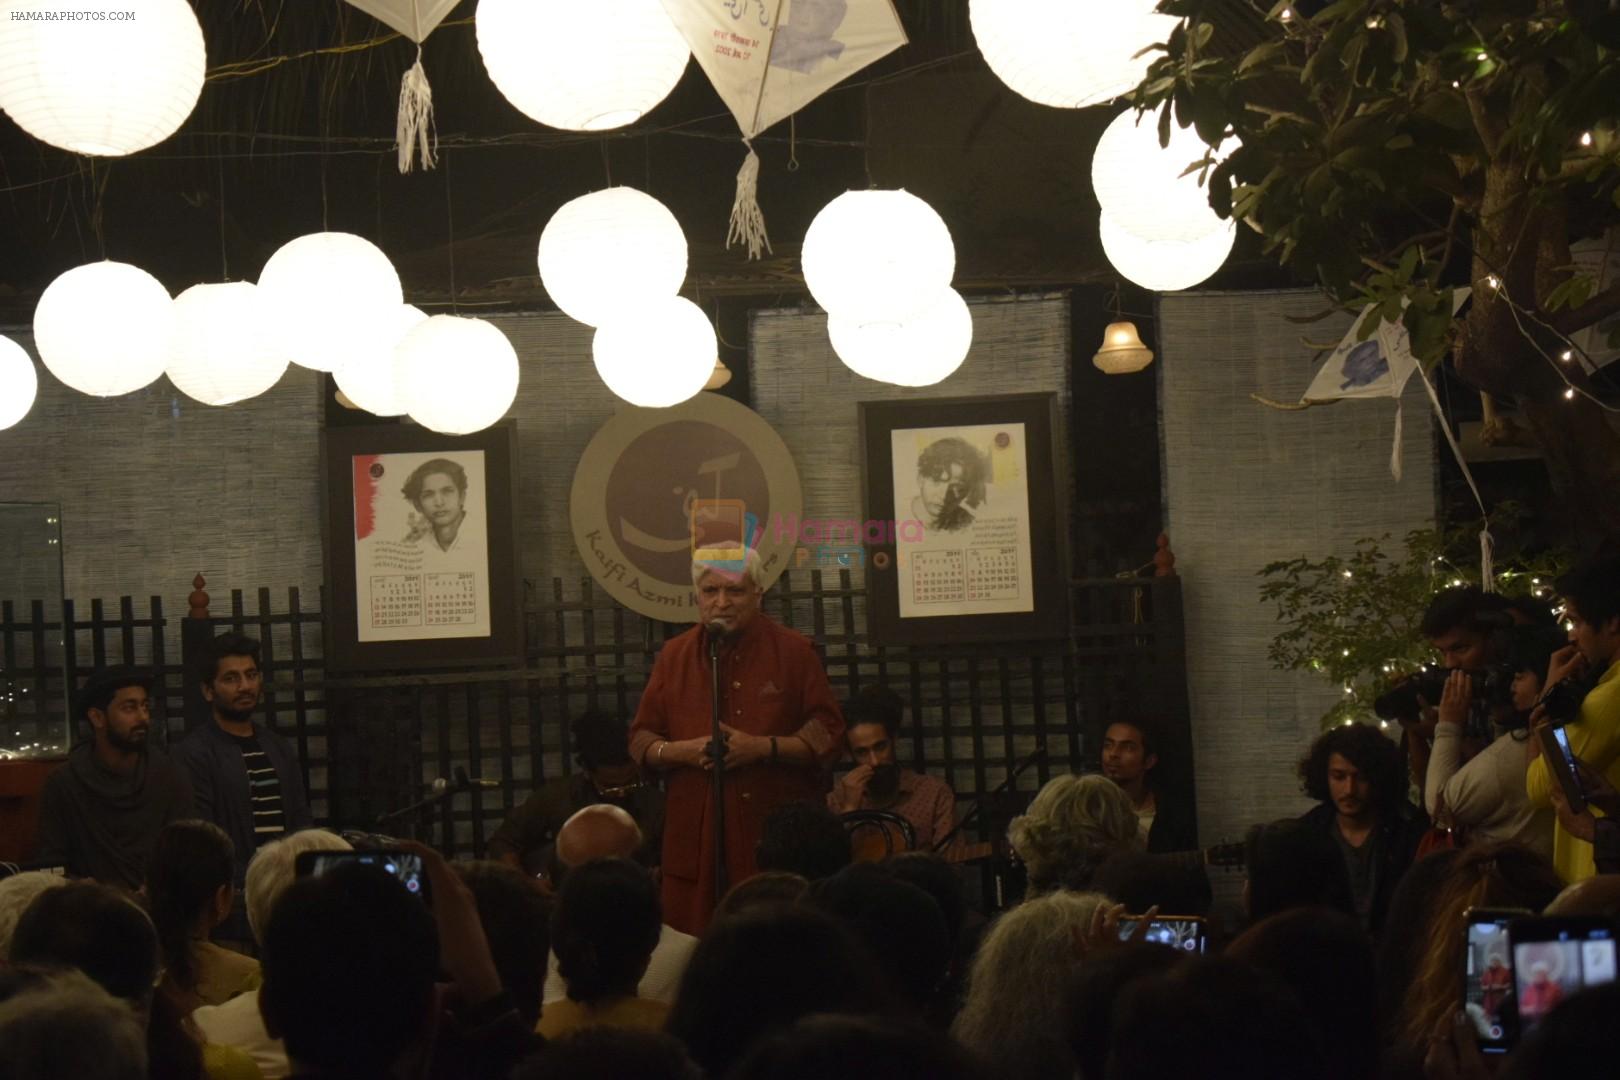 Javed AKhtar at Kaifi Azmi's centenary celebrations with a musical evening at his juhu residence on 10th Jan 2019